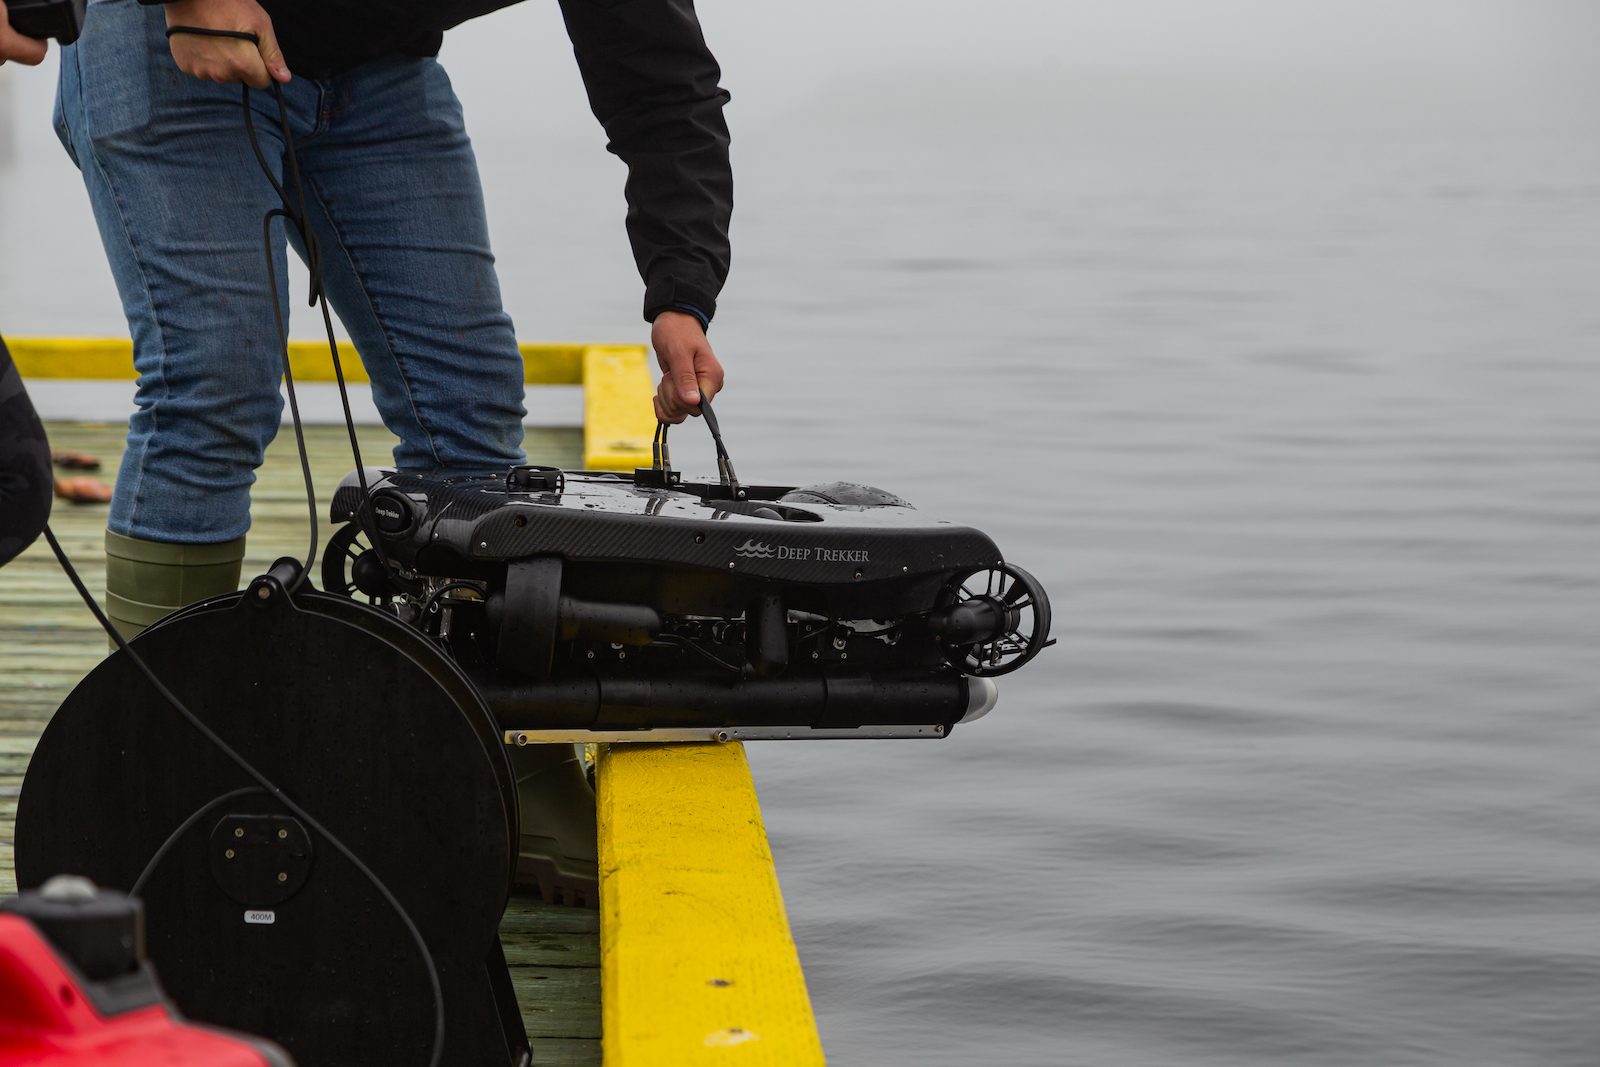 Maximize Your Operations with Submersible ROVs